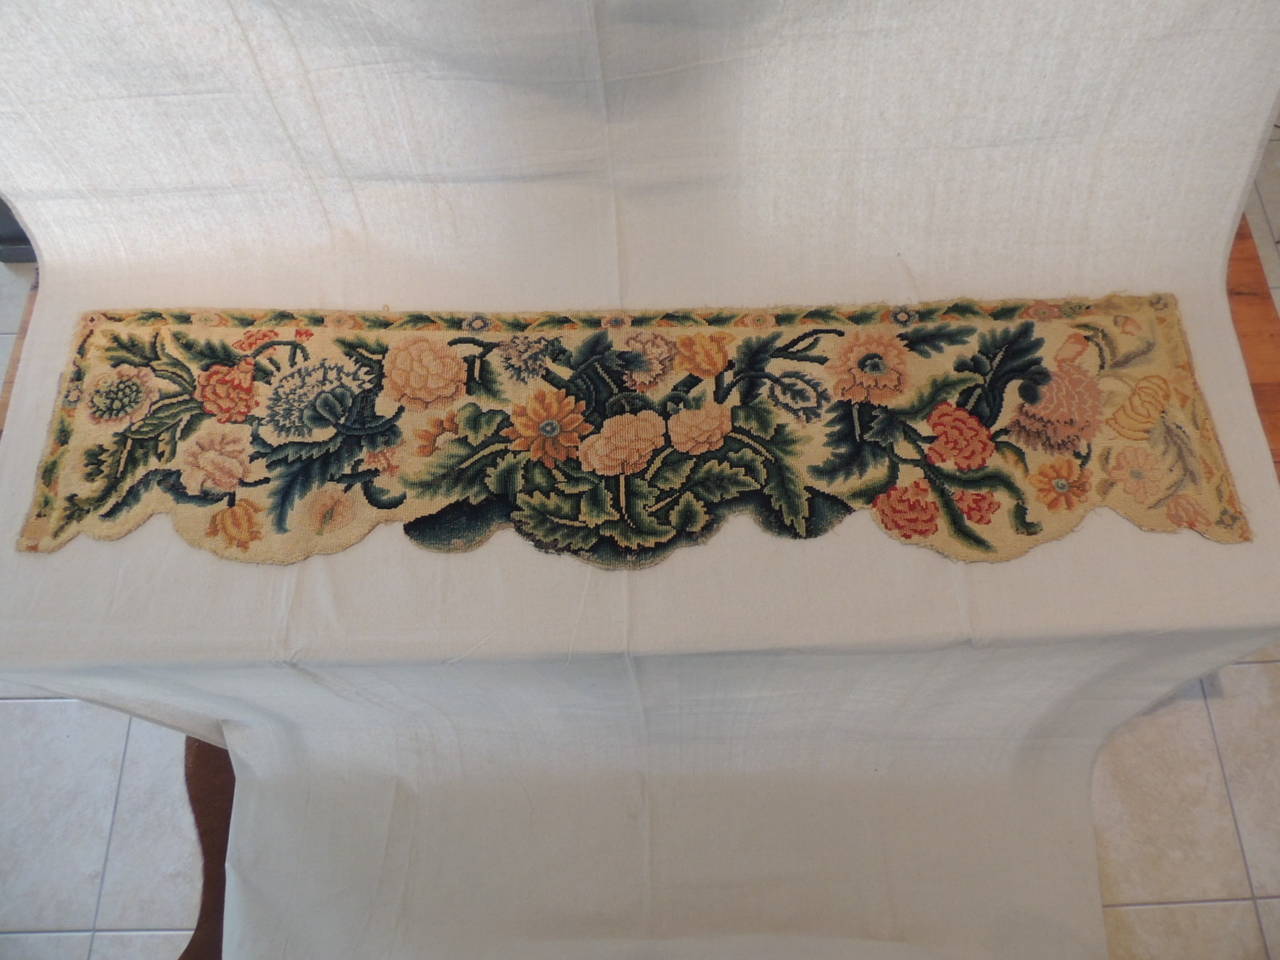 Antique Textiles Galleries...
18th century needlework tapestry valance or pelmet depicting blooming flowers and vines, in shades of green, gold, peach, pinks on a yellow background.  Ideal as a window balance or to make bolster pillows.